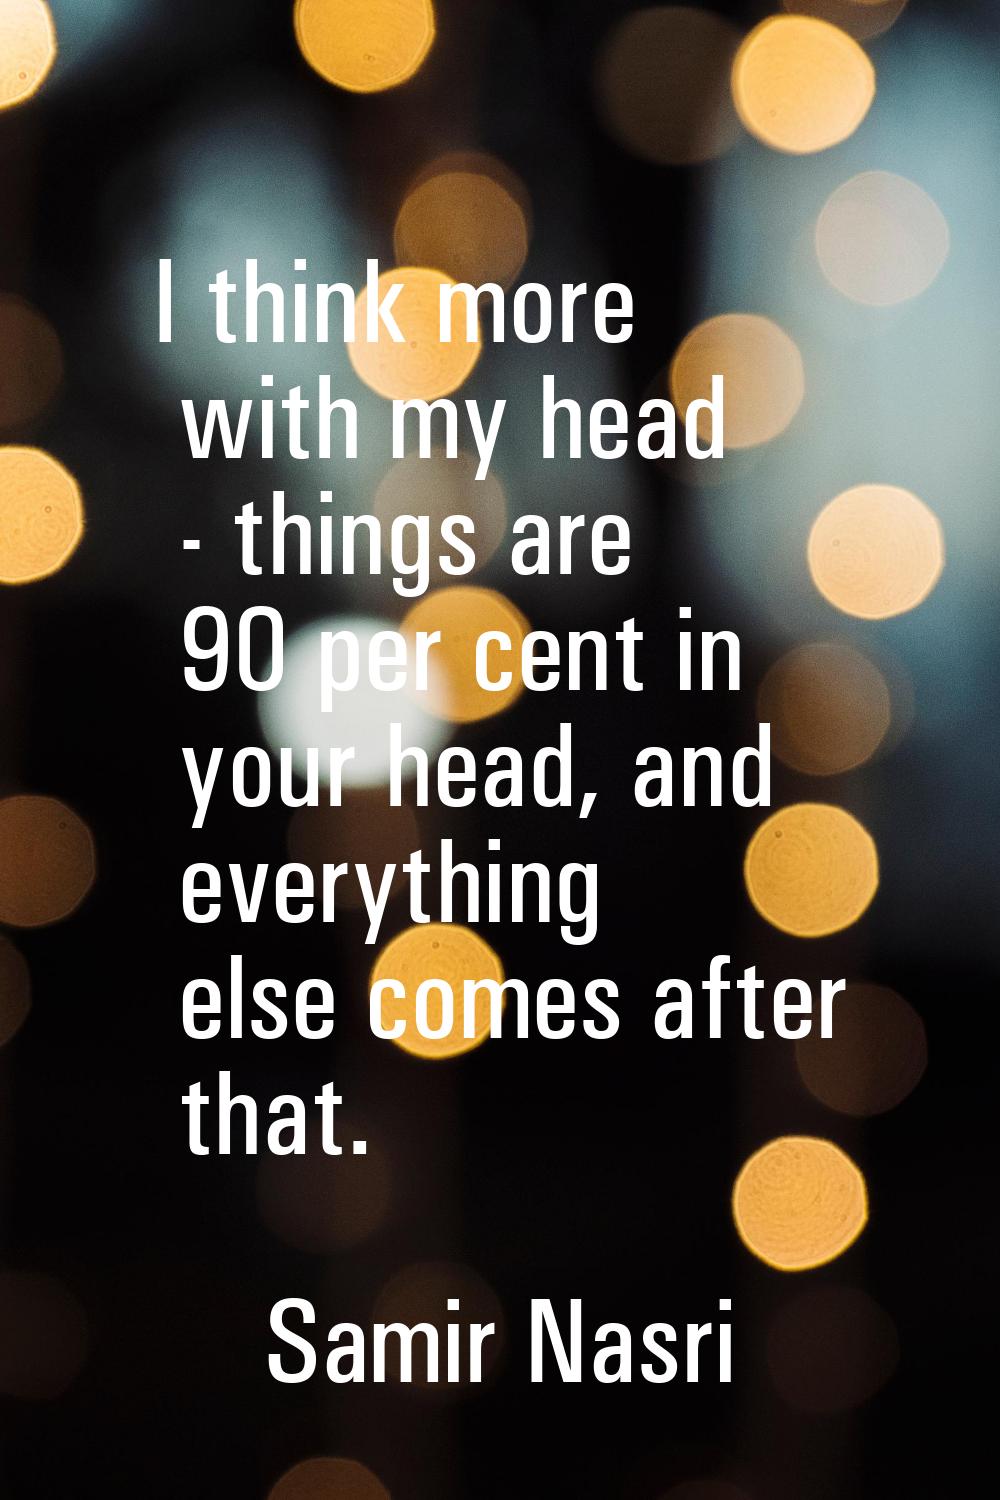 I think more with my head - things are 90 per cent in your head, and everything else comes after th